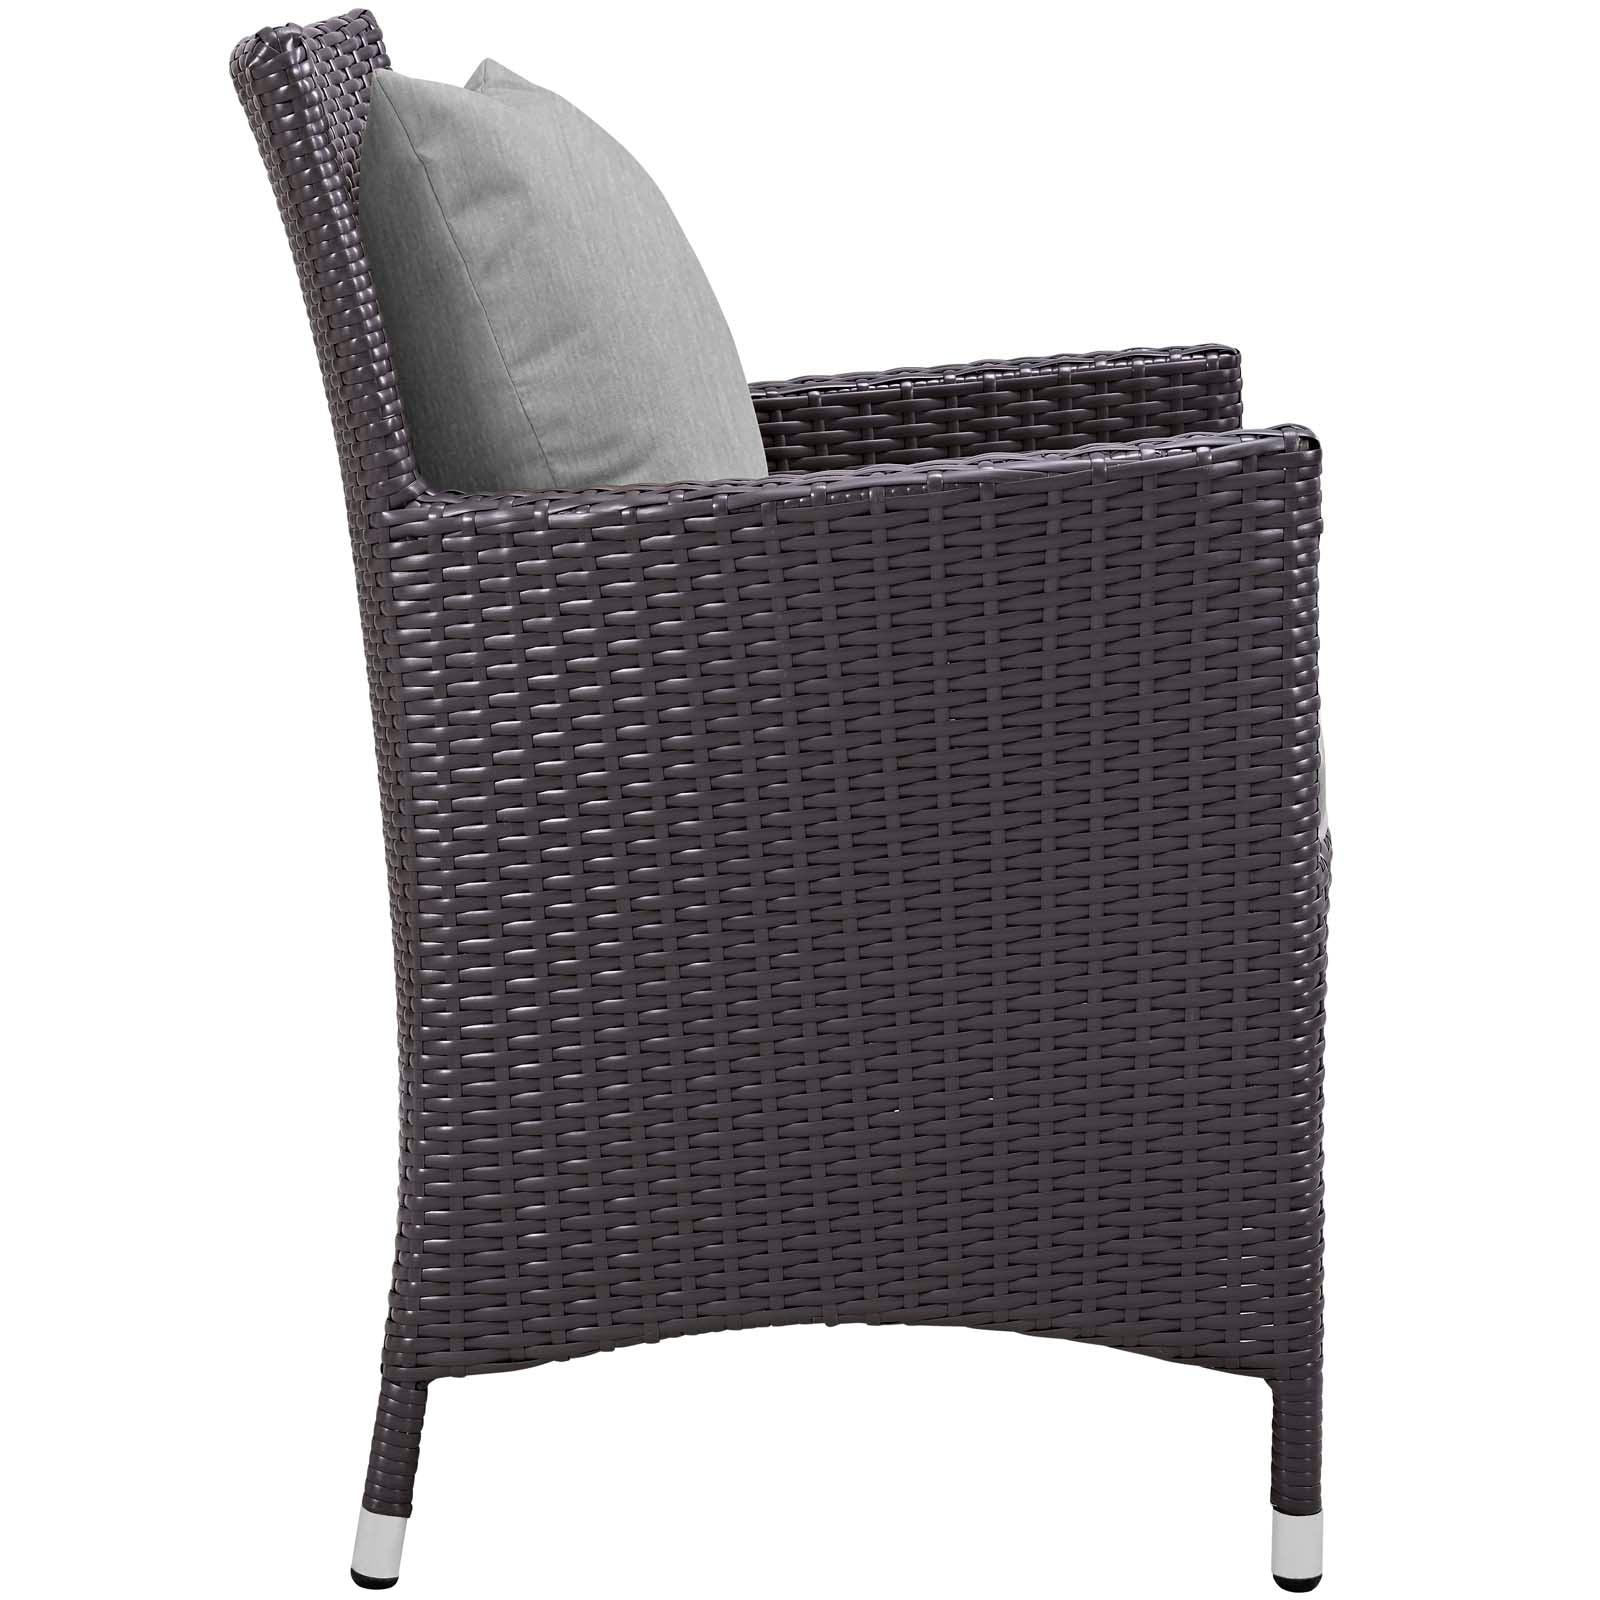 Modway Outdoor Dining Chairs - Convene Dining Outdoor Patio Armchair Espresso Gray